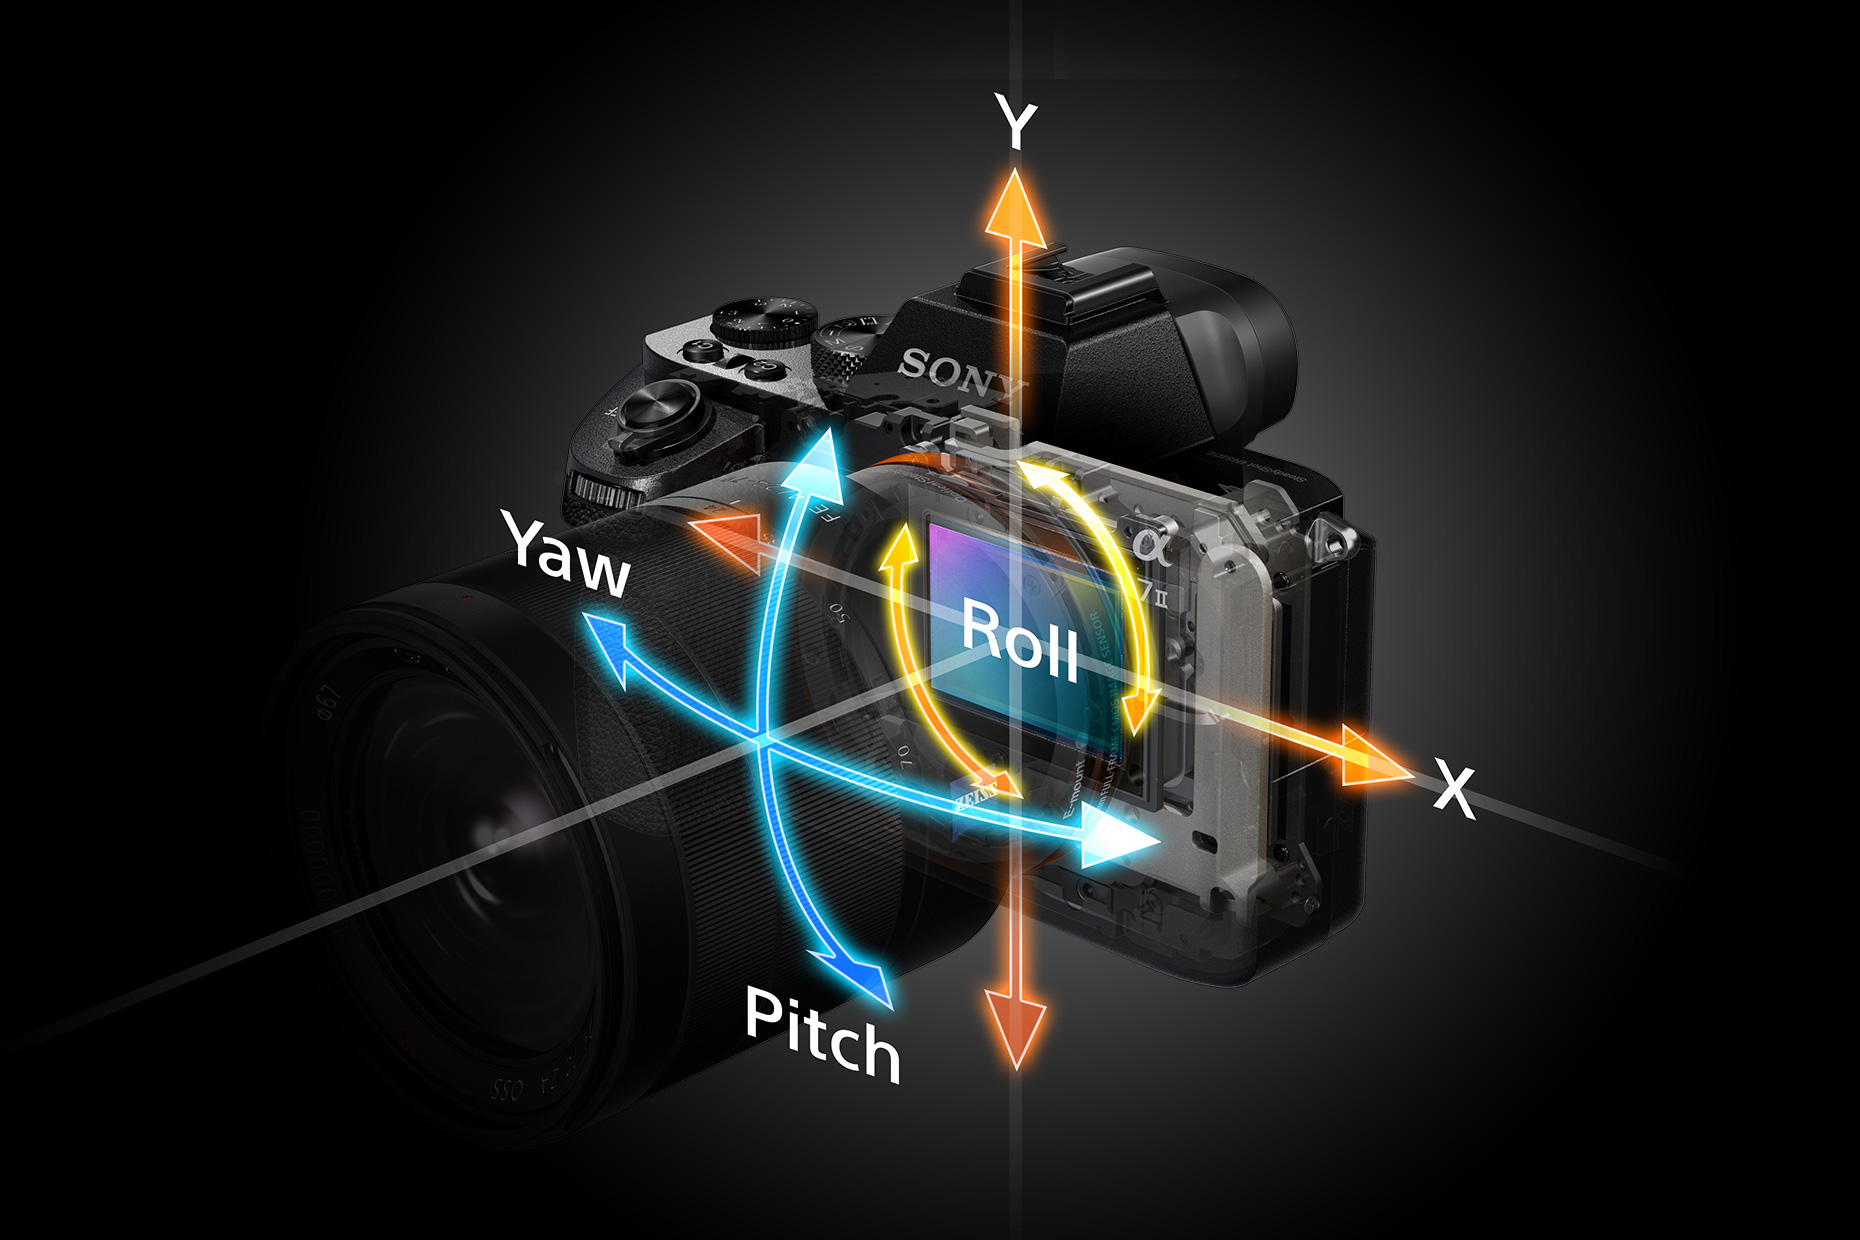 Sony A7 II 5 Axis Image Stabilization